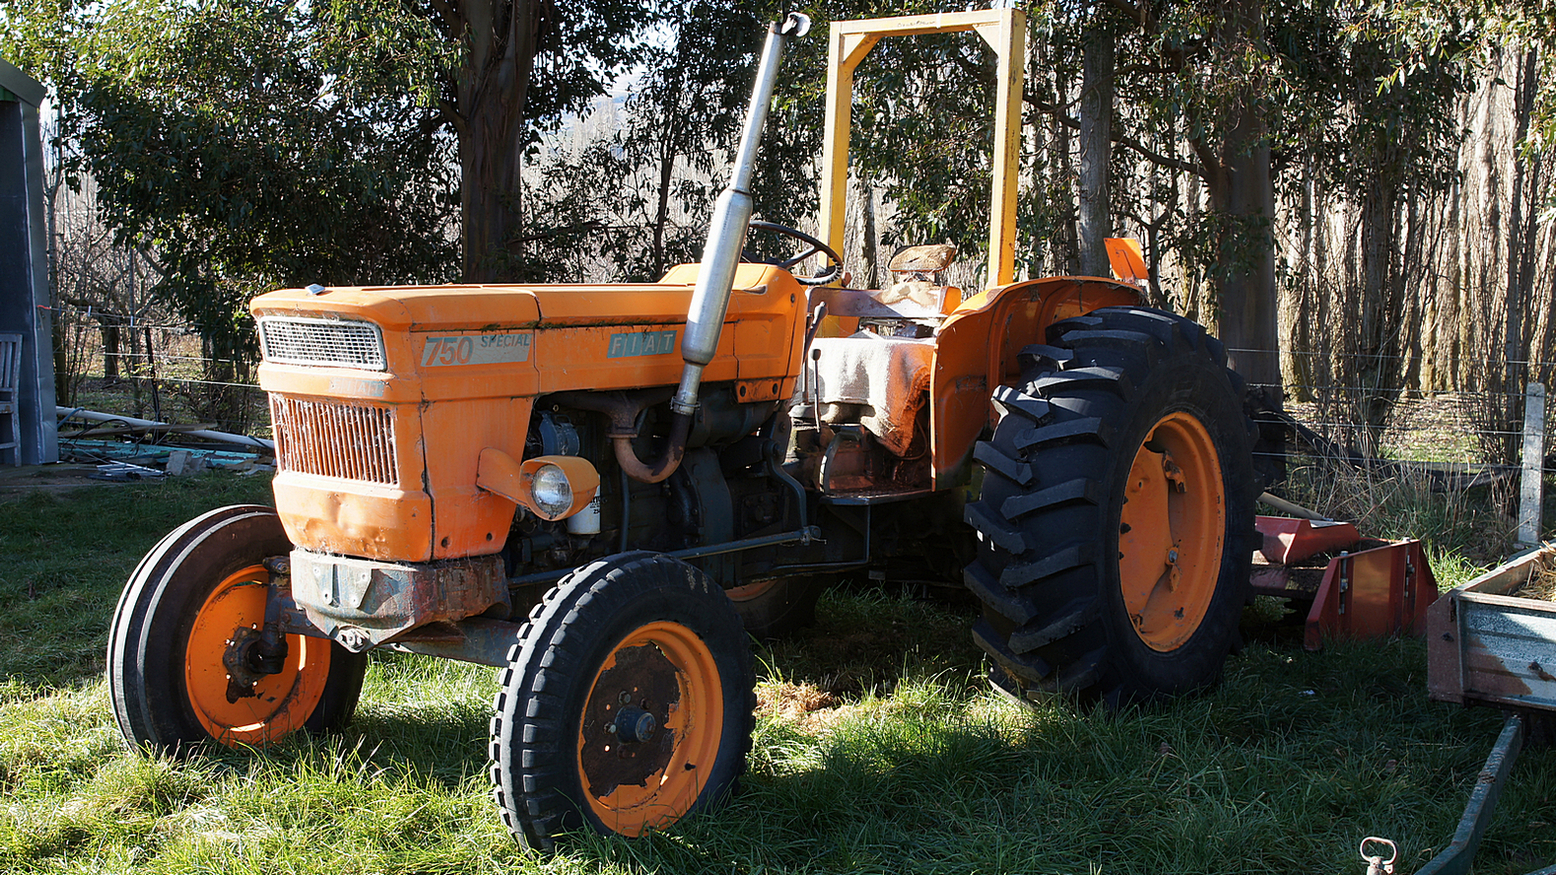 Fiat 750 Special Tractor. | Flickr - Photo Sharing!